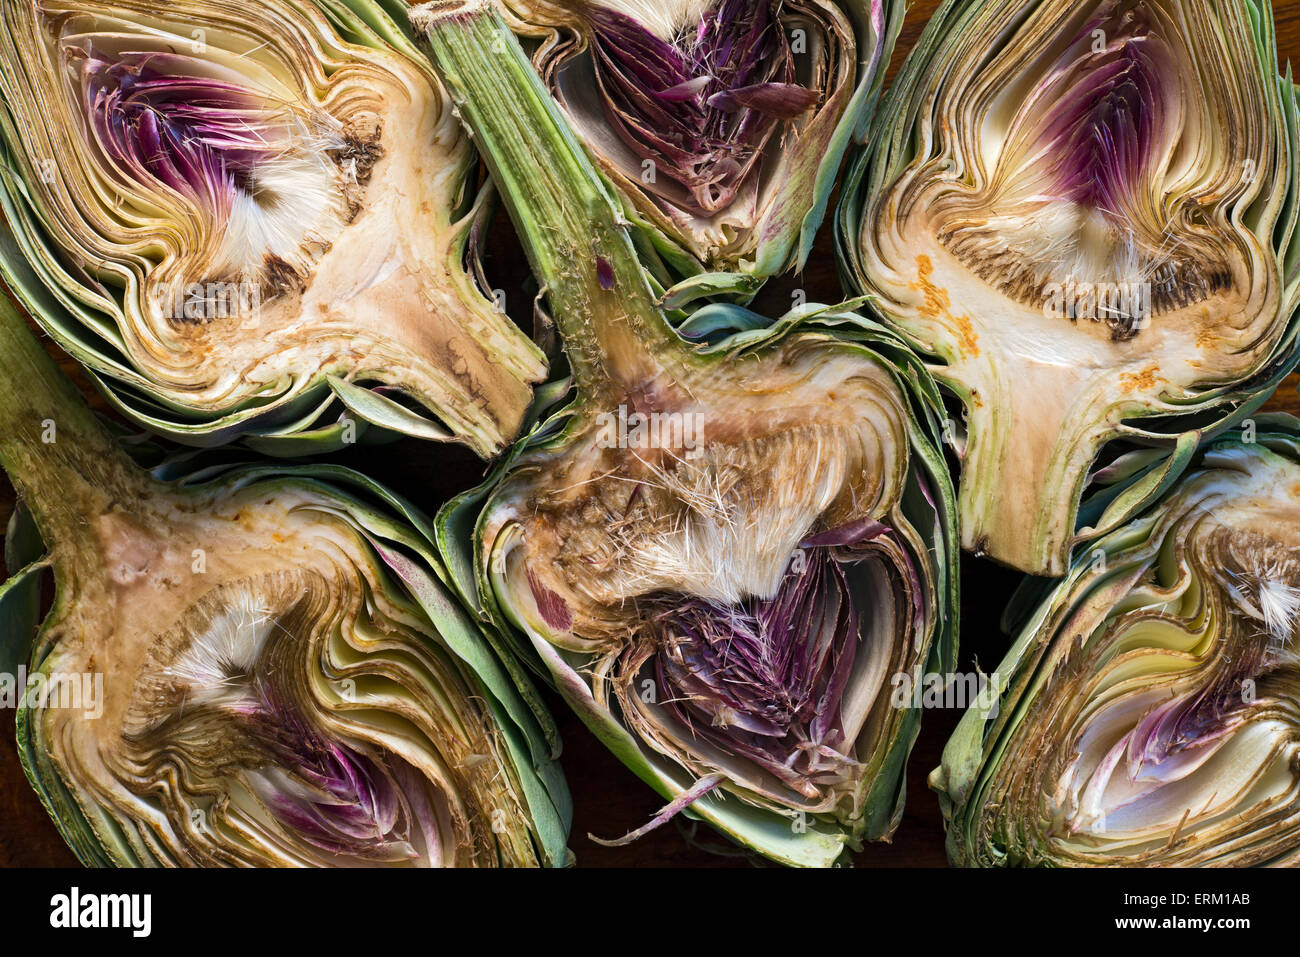 Background of various cuts artichokes Stock Photo